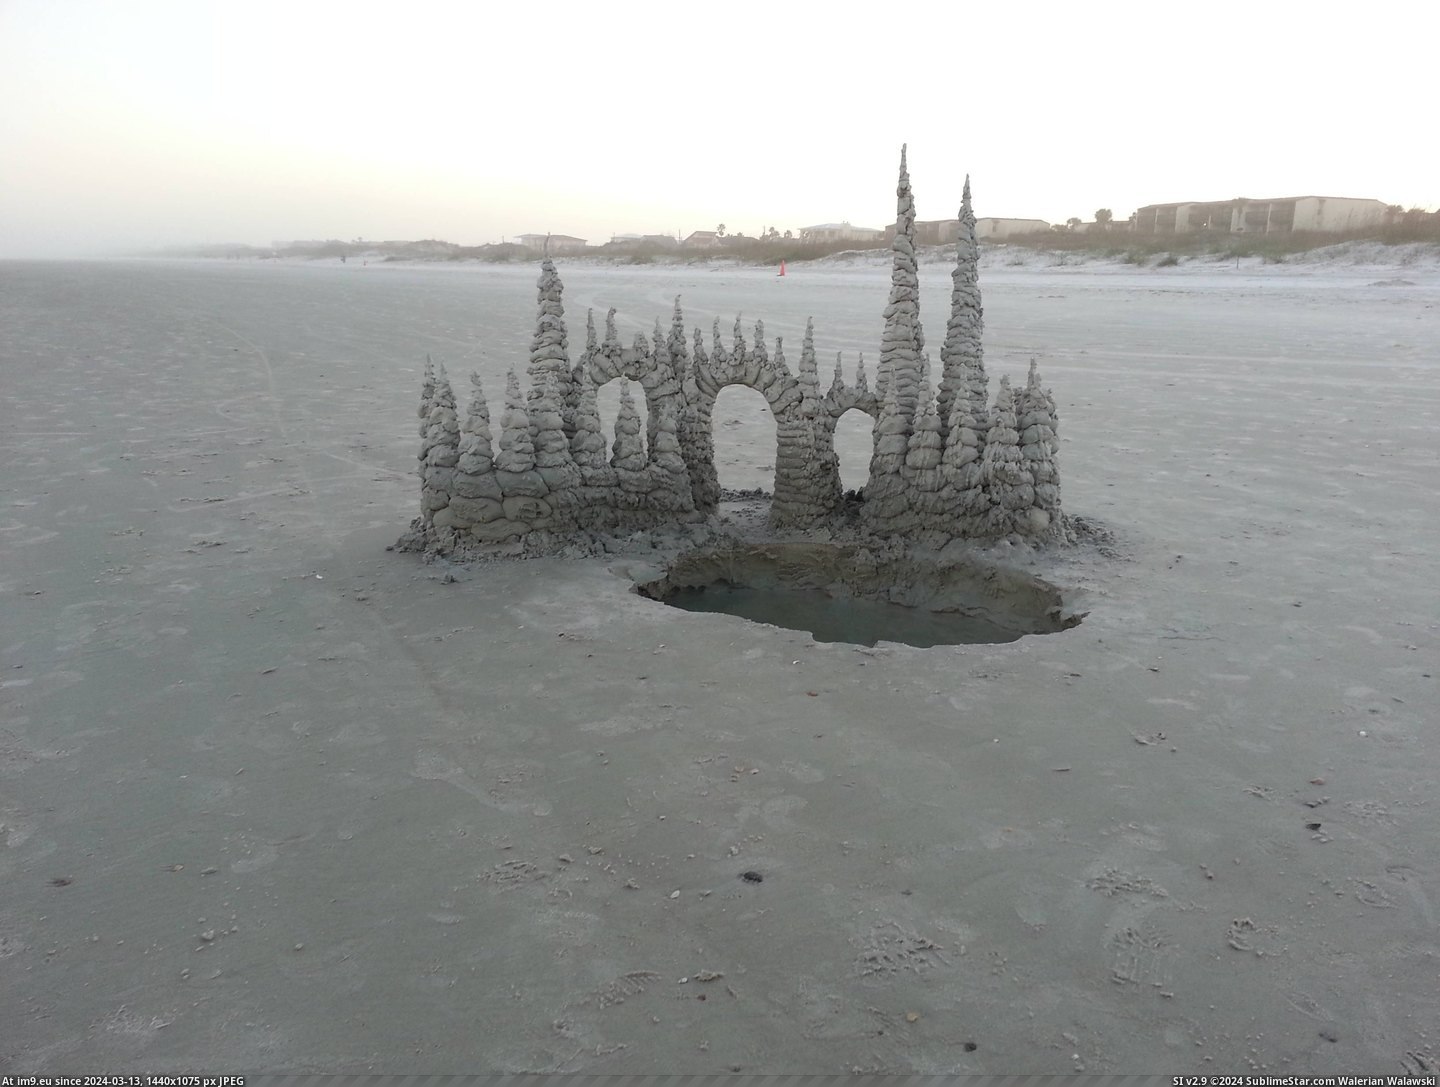 #You #For #Beach #Tonight #Cool #Idea #Sandcastle #Out #But #Smile [Pics] I found a cool sandcastle on the beach tonight. Have no idea who made it, but thanks for smile if you're out there. Pic. (Изображение из альбом My r/PICS favs))